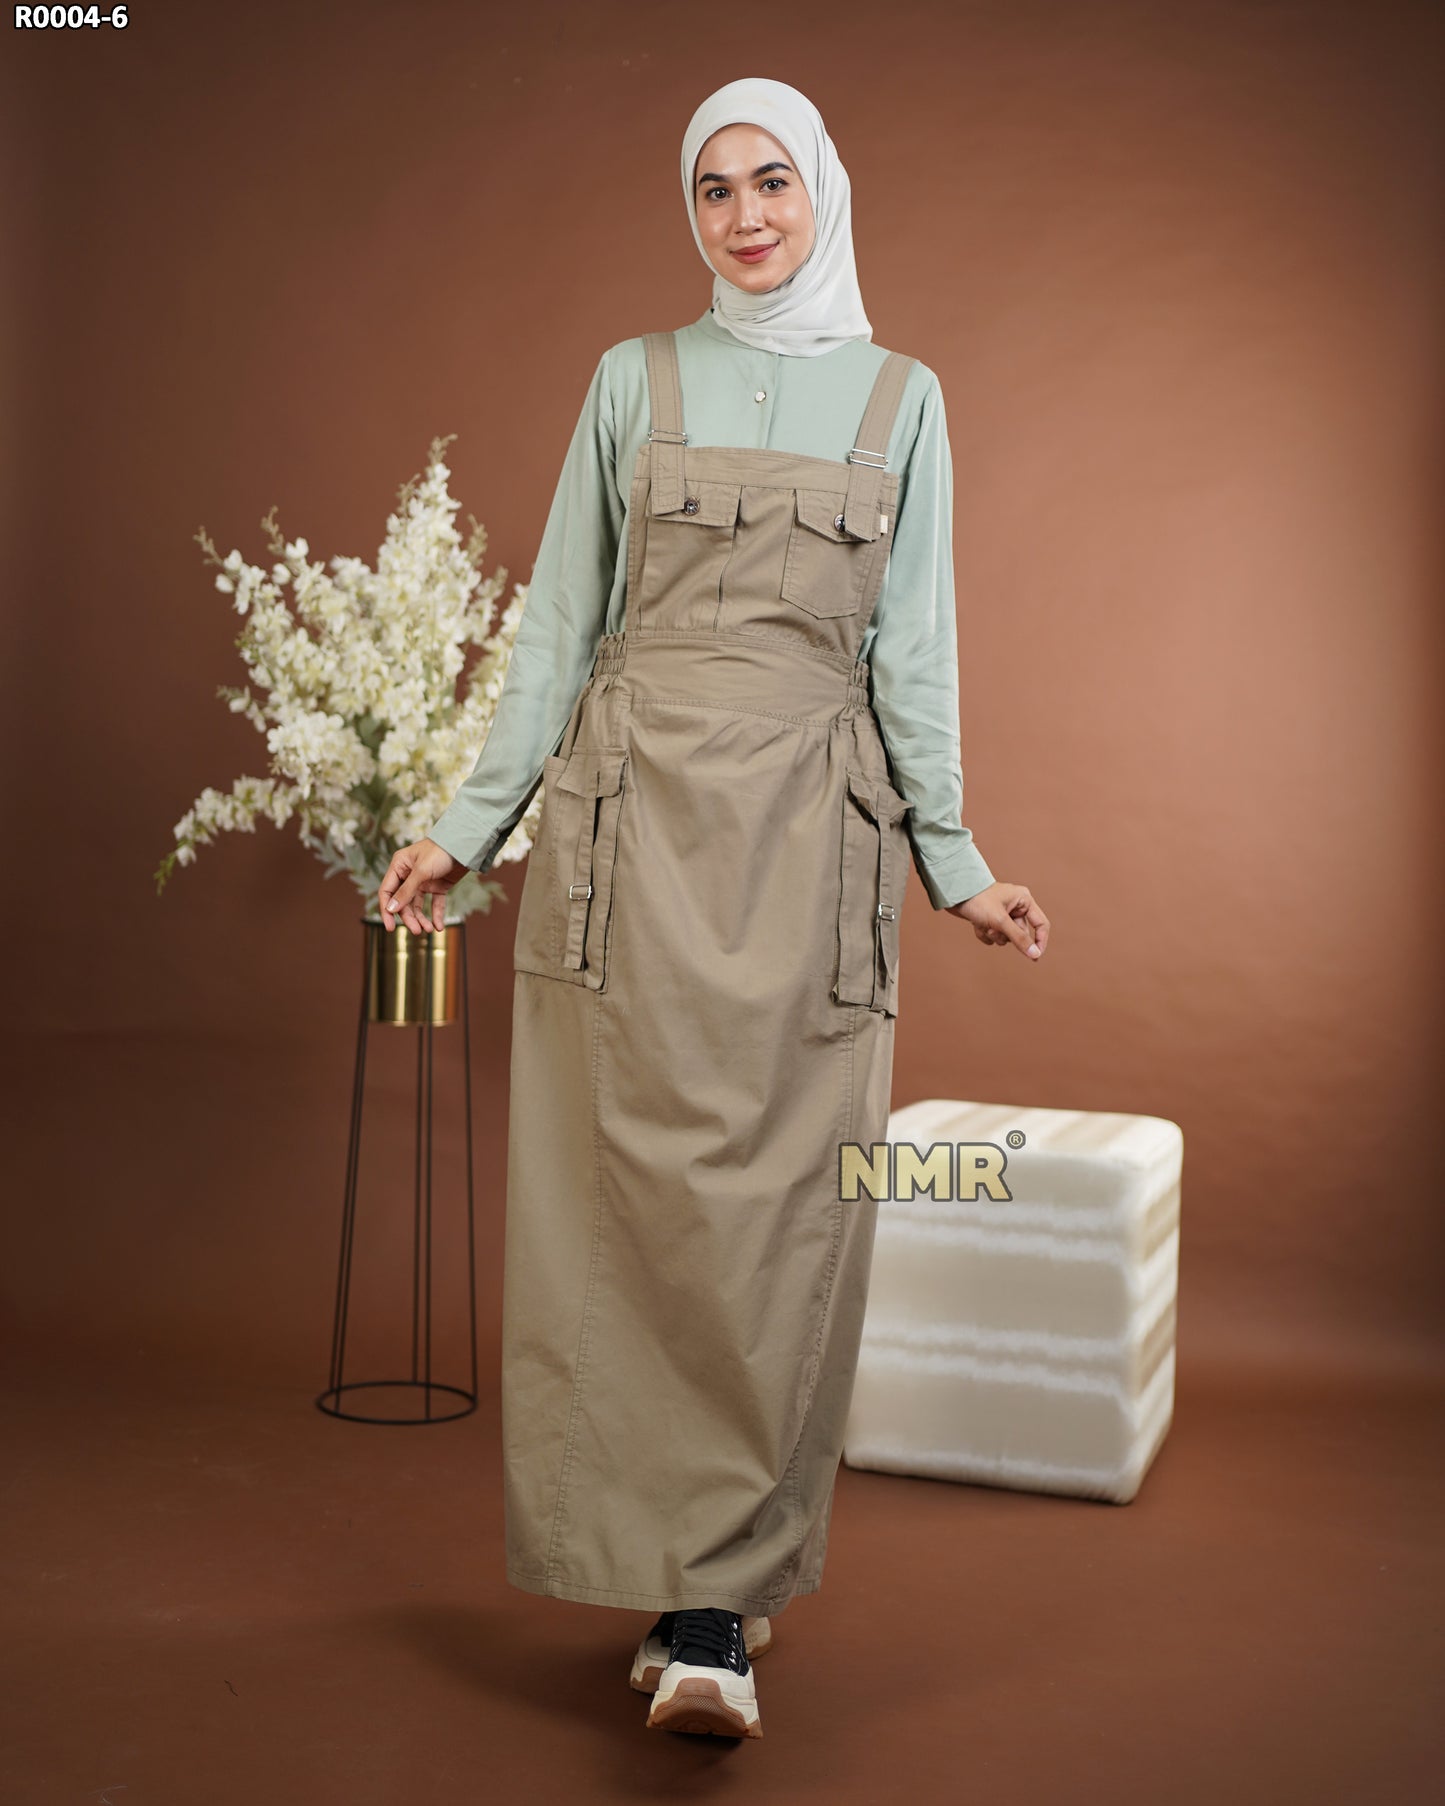 NMR Gamis Jumpsuit Overall Baby Canvas Vol R004-6